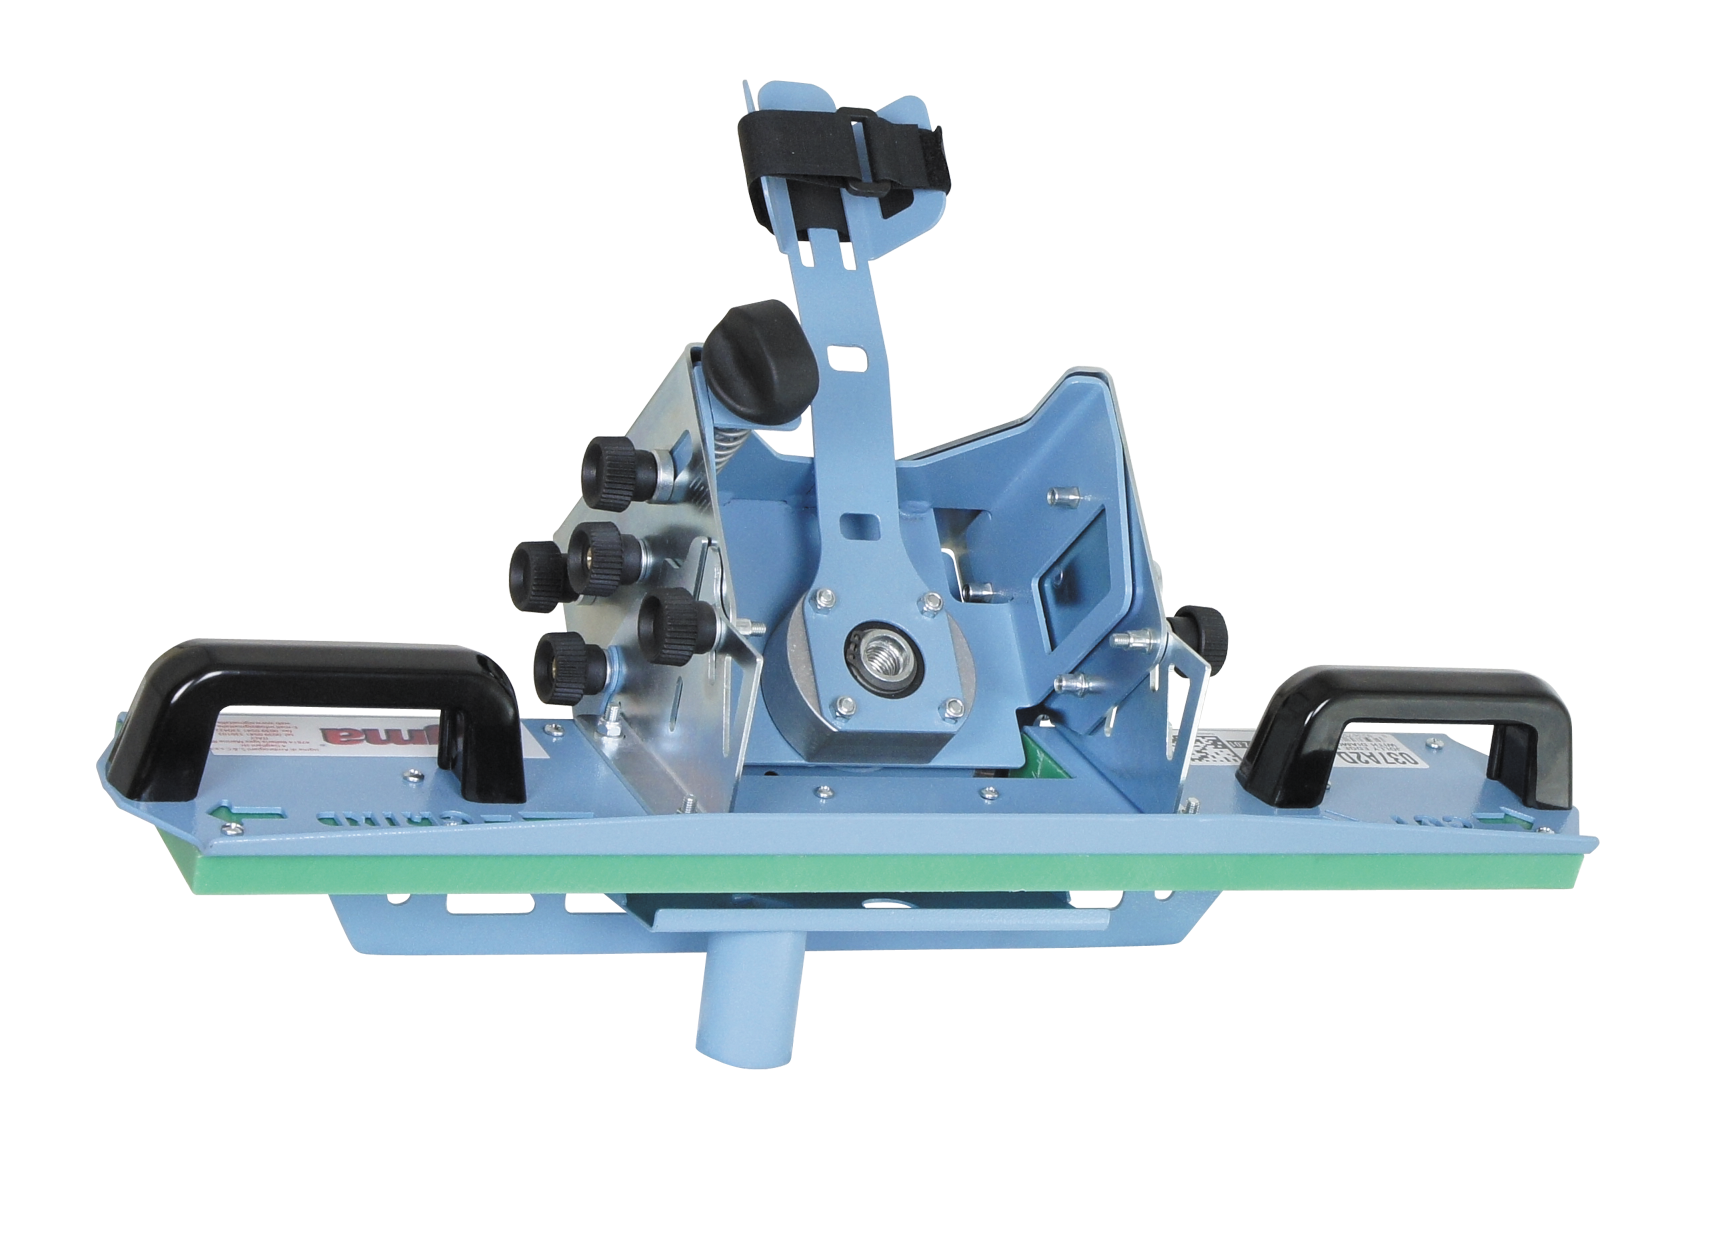 Sigma® Edging Tools - Jolly Edge Machine for precision miters and half bullnoses.